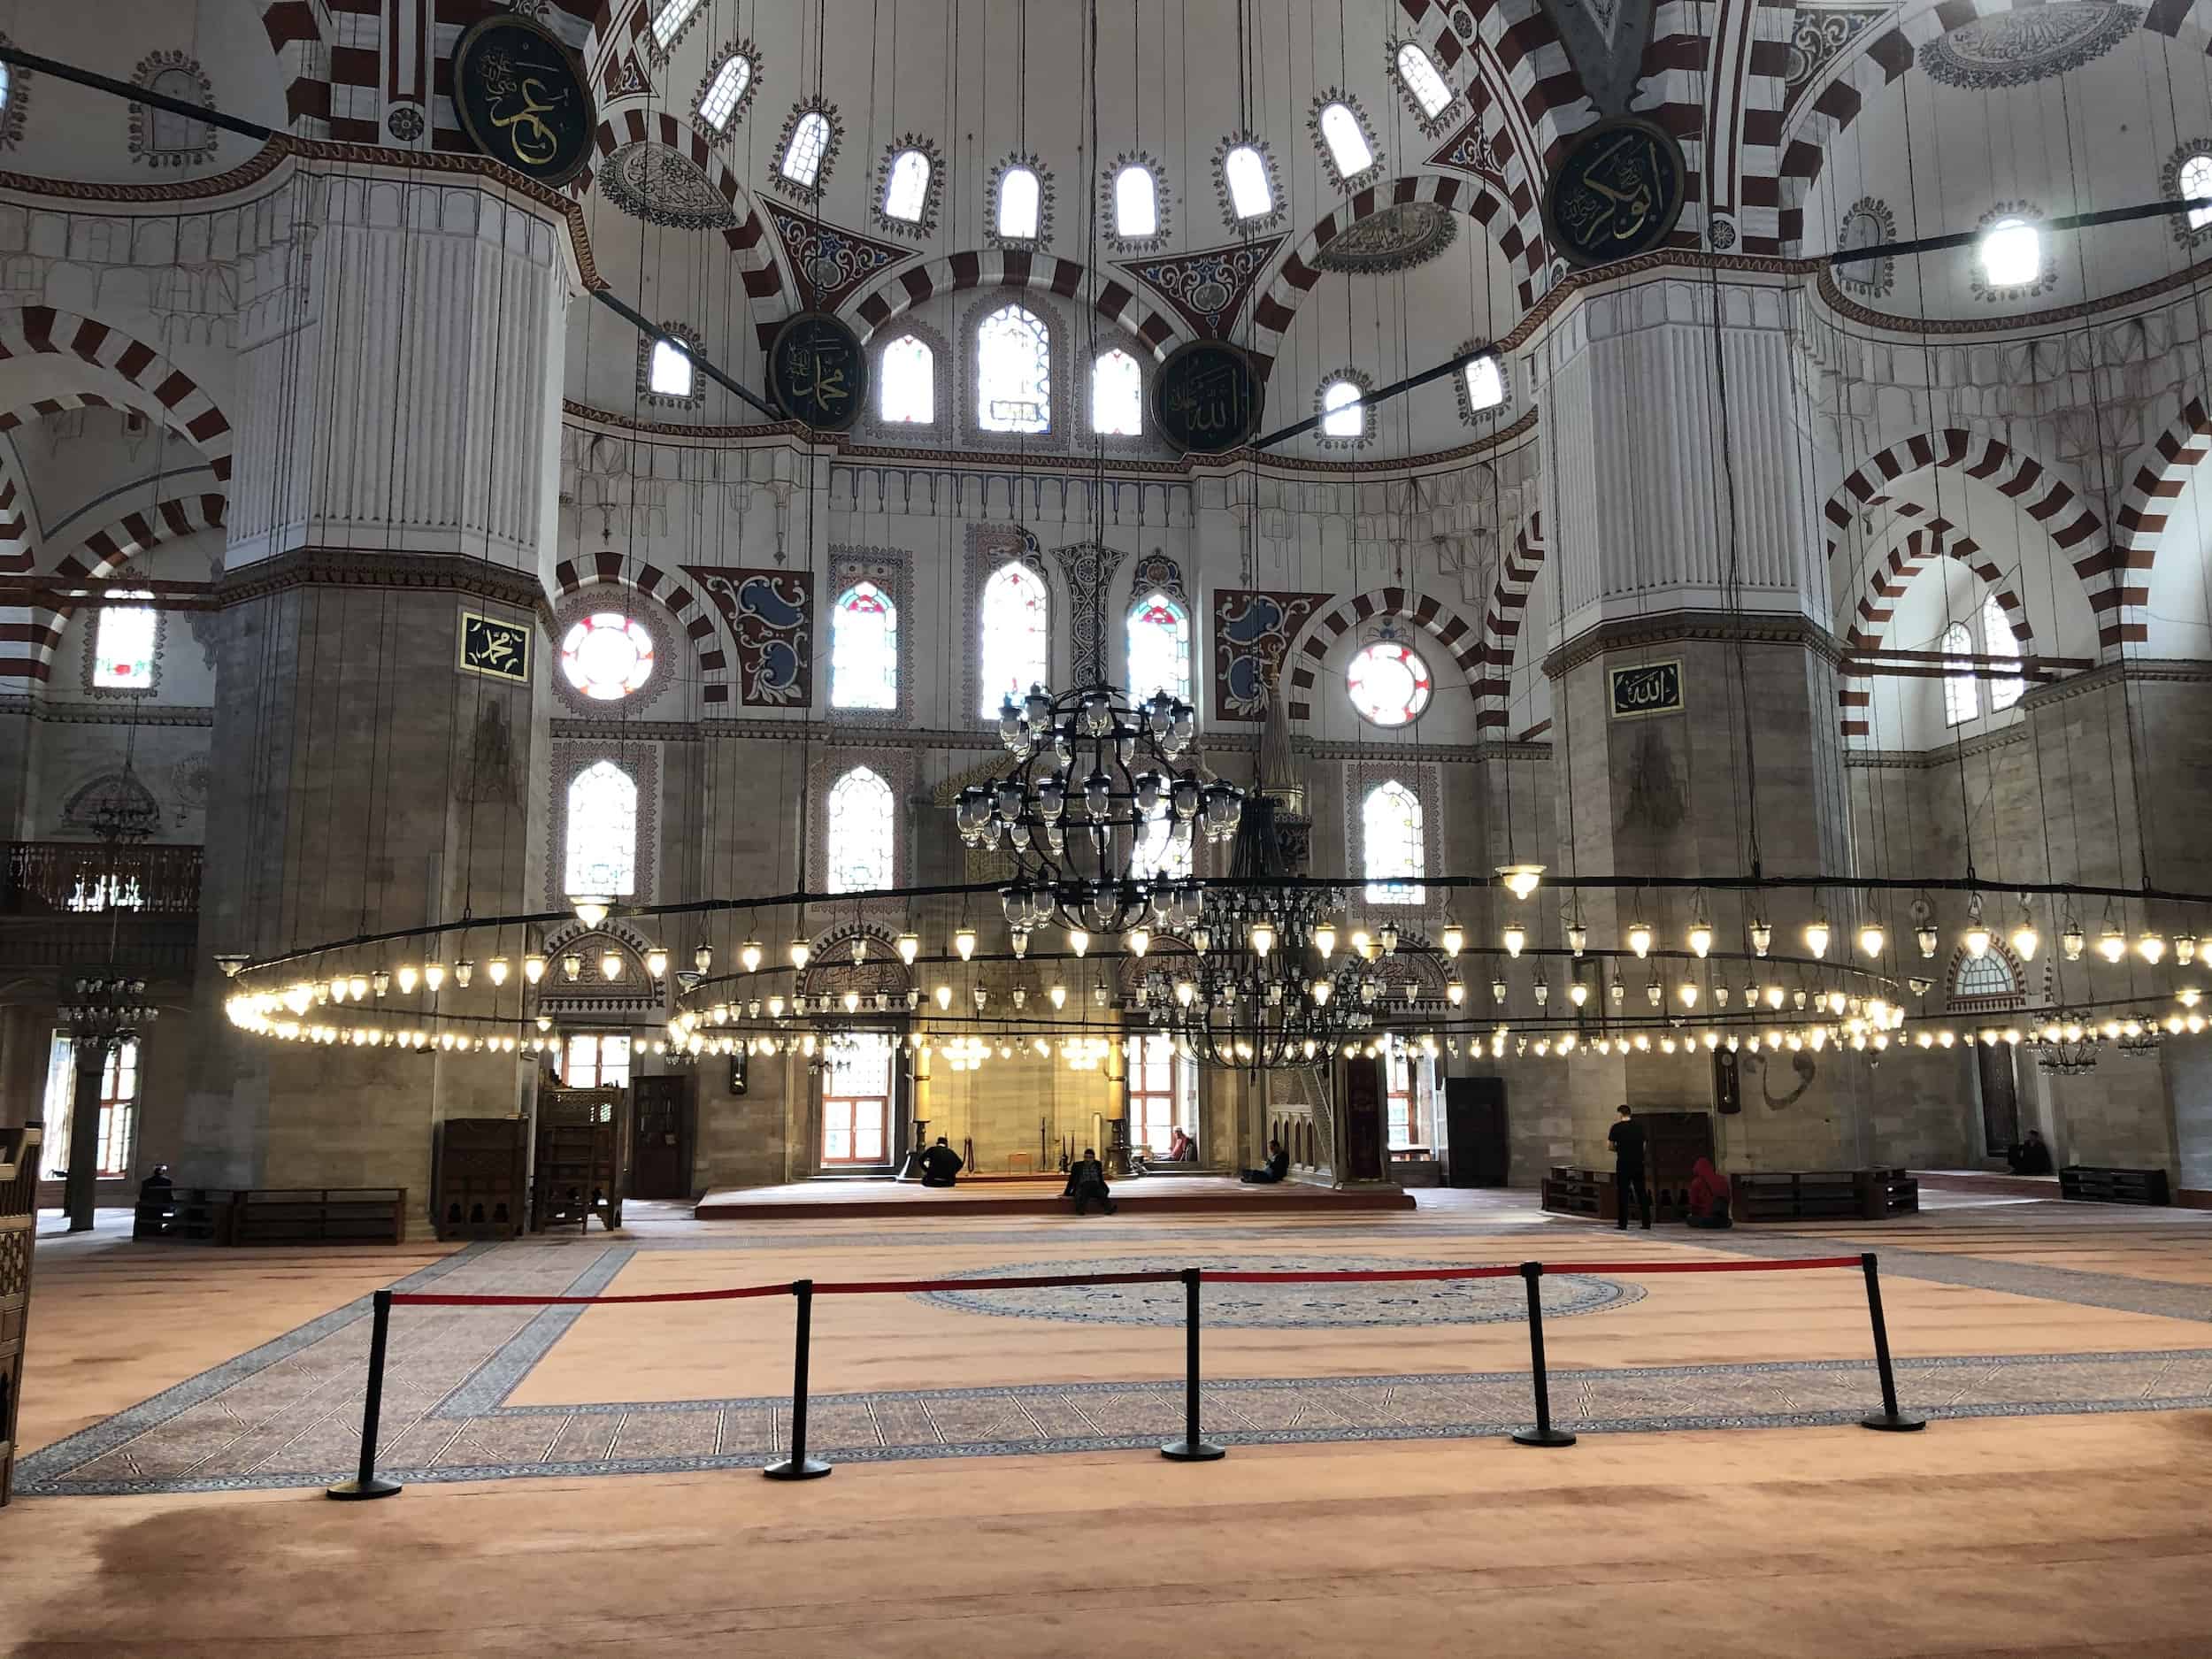 Prayer hall at the Şehzade Mosque in Istanbul, Turkey